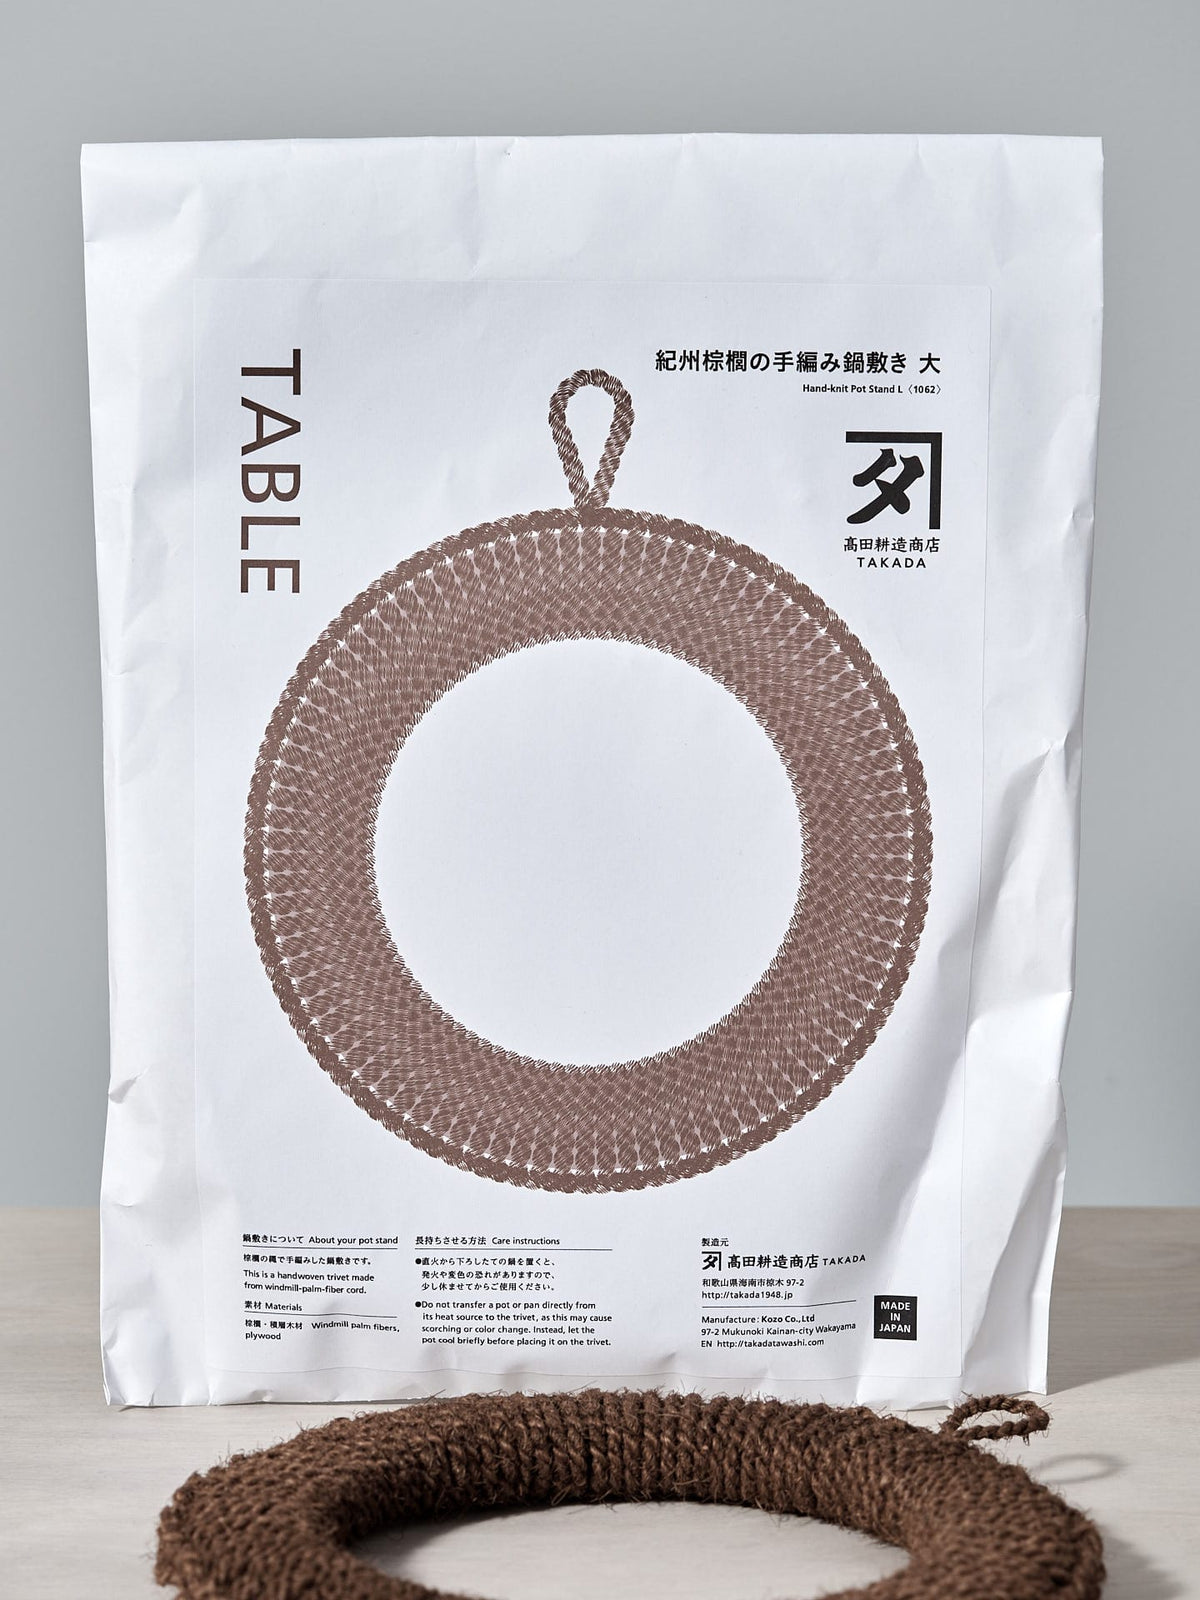 A bag of Hand-Knit Trivet – Large yarn with a crocheted ring on it by Takada.